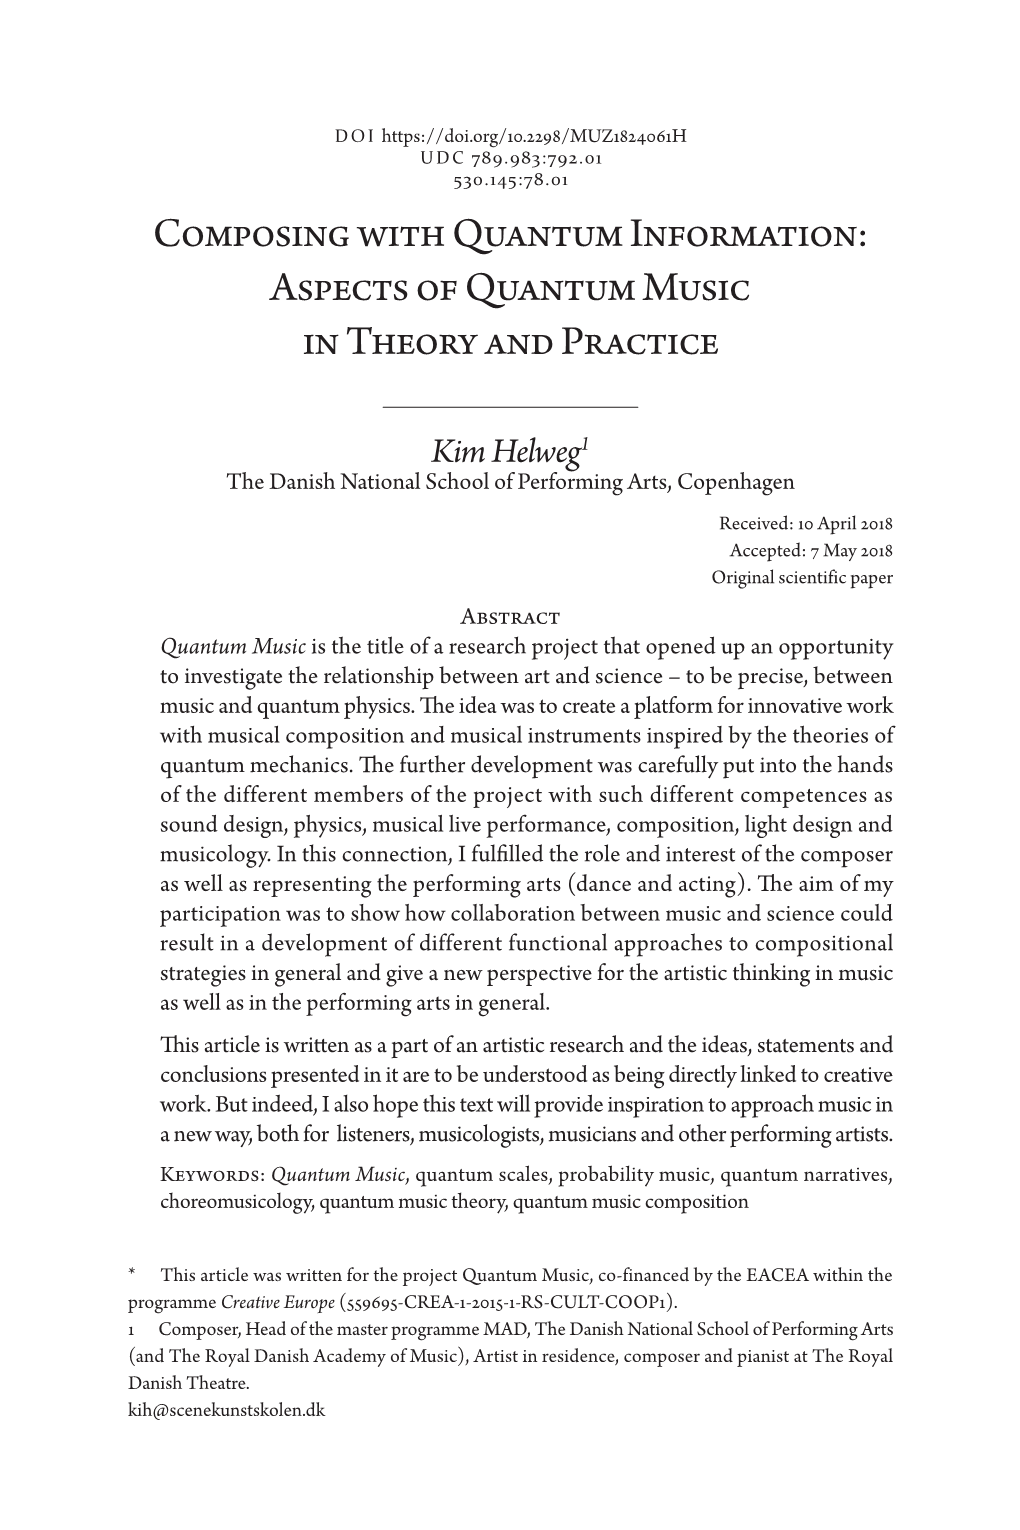 Aspects of Quantum Music in Theory and Practice